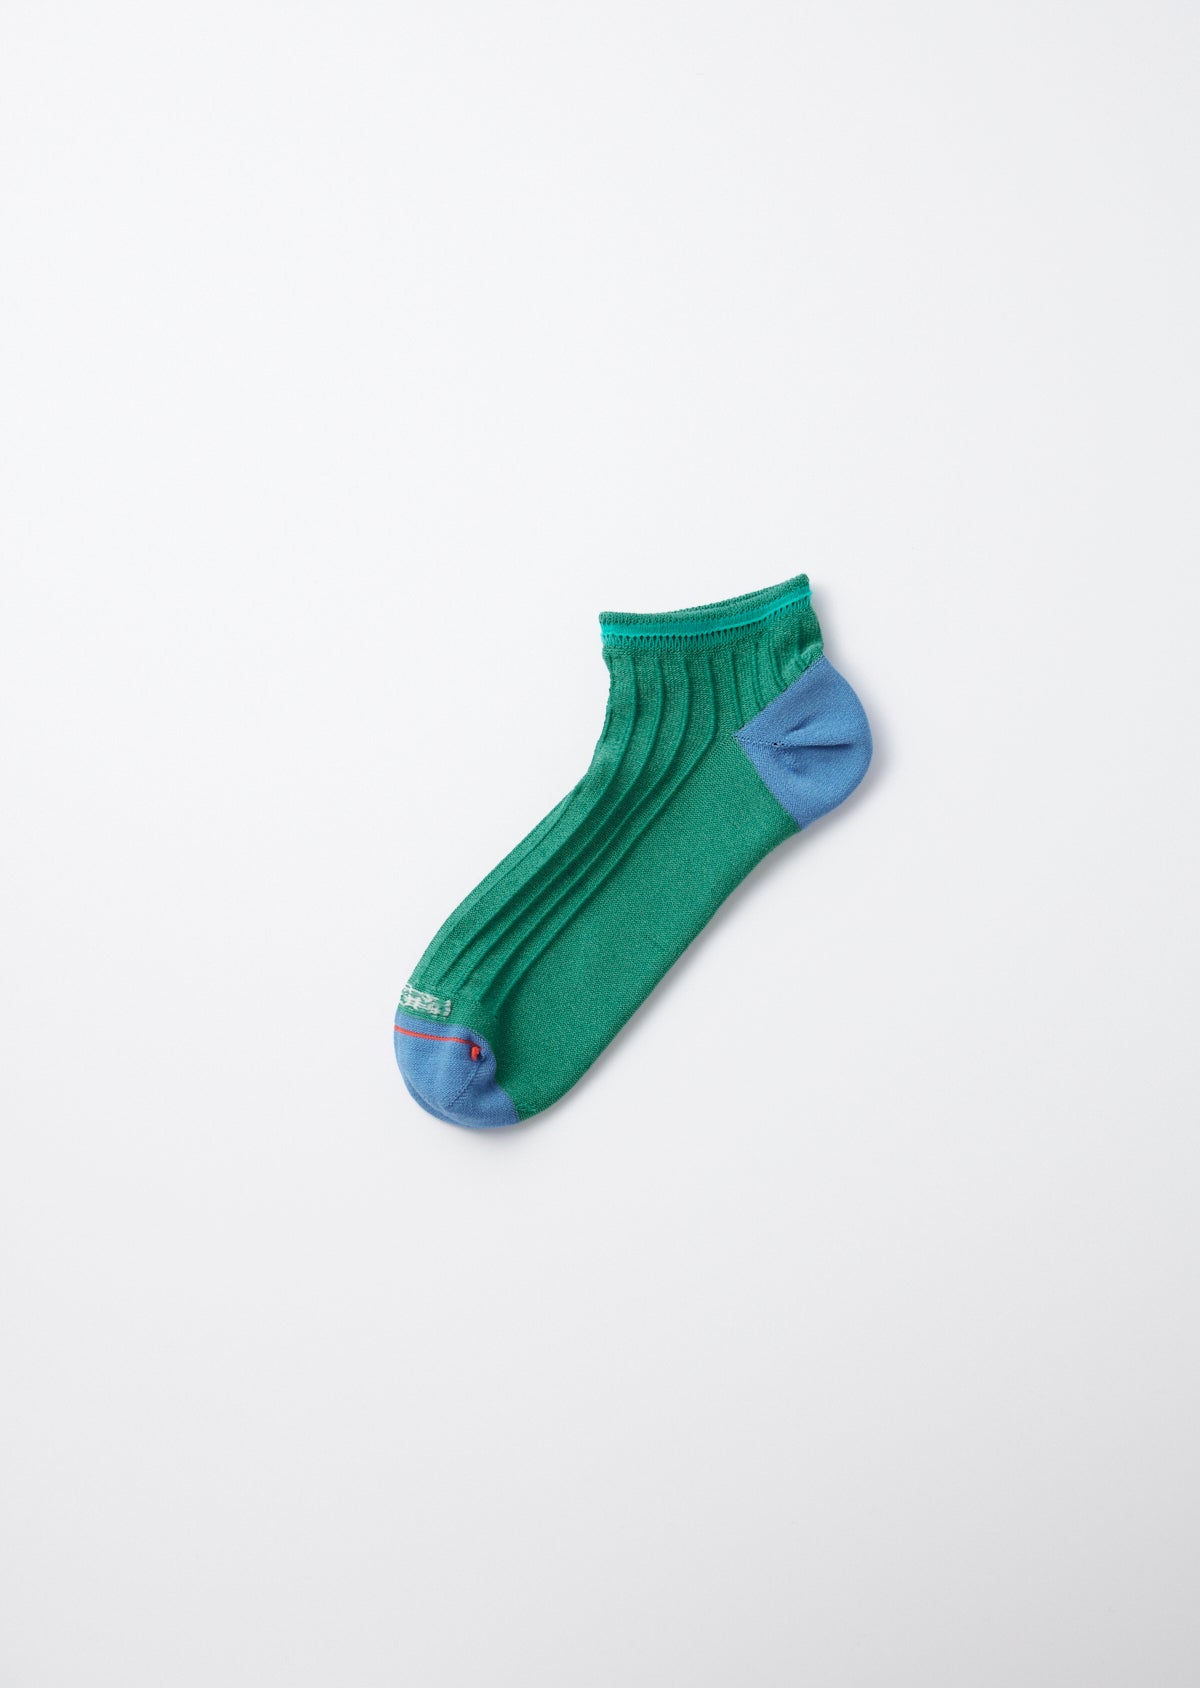 HYBRID ANKLE SOCKS ”ORGANIC COTTON ＆ RECYCLE POLYESTER” - R1460 